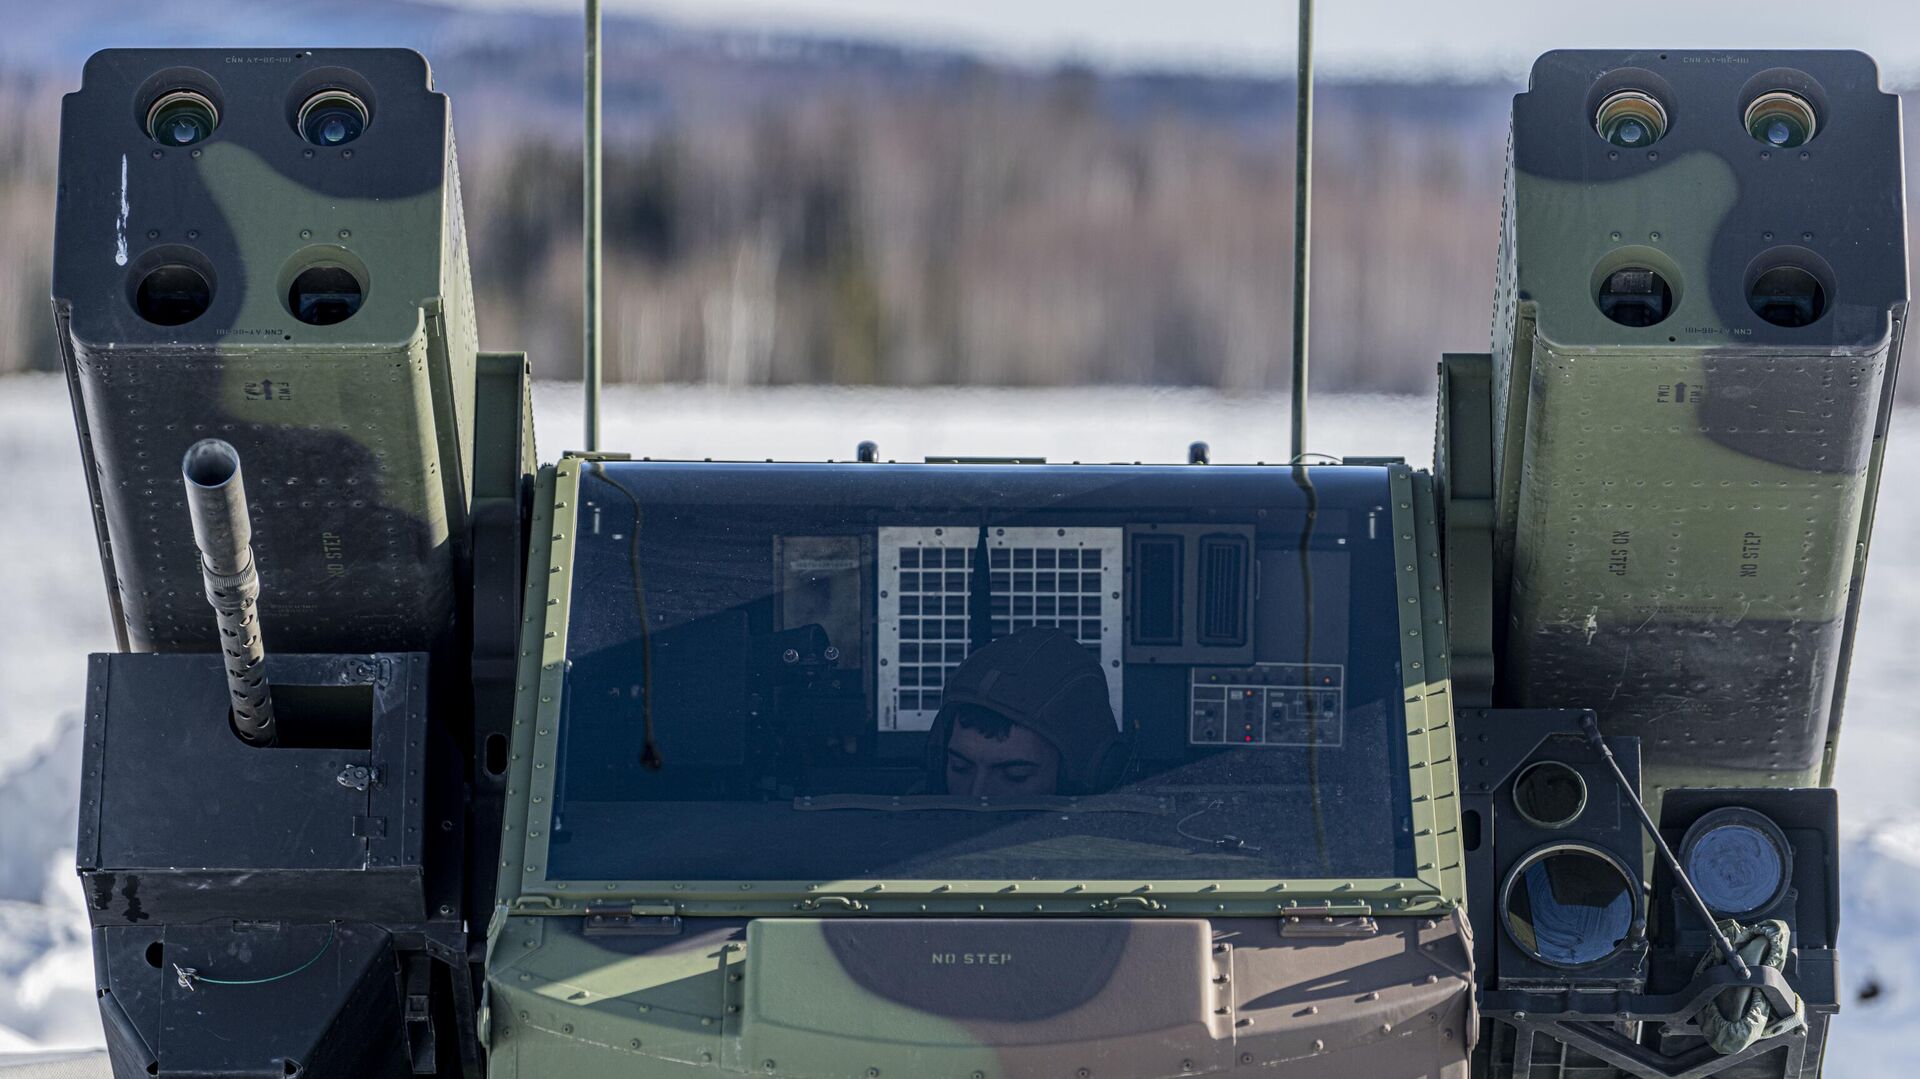 U.S. Army Specialist Jacob Smith, an Avenger gunner assigned to the 1st Battalion, 265th Air Defense Artillery Regiment, Florida Army National Guard, operates an Avenger air defense system during Exercise ARCTIC EDGE 2022 at Eielson Air Force Base, Alaska, March 14, 2022. The Avenger air defense system is a self-propelled surface-to-air missile system that provides mobile, short-range air defense protection for ground units against cruise missiles, unmanned aerial vehicles, low-flying fixed-wing aircraft, and helicopters. (U.S. Air Force photo by Senior Airman Joseph P. LeVeille) - Sputnik International, 1920, 24.03.2023